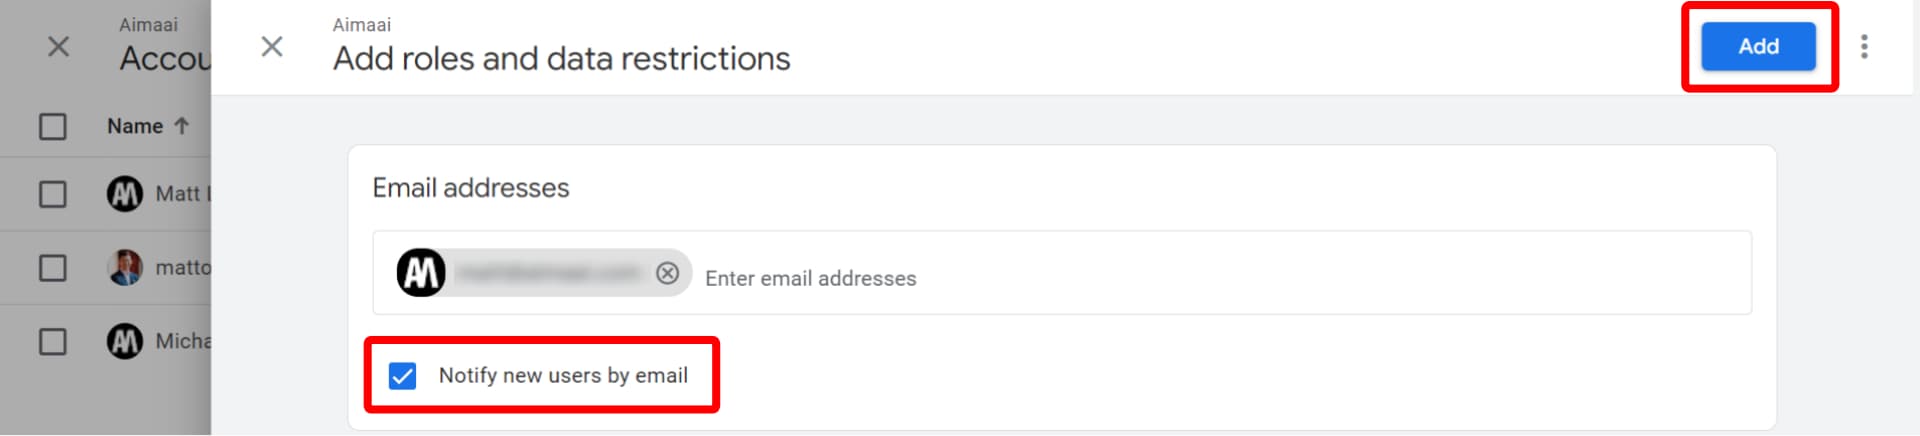 A screenshot highlighting the "notify new users by email" checkbox and "add" button in an "add roles and data restrictions" user interface.